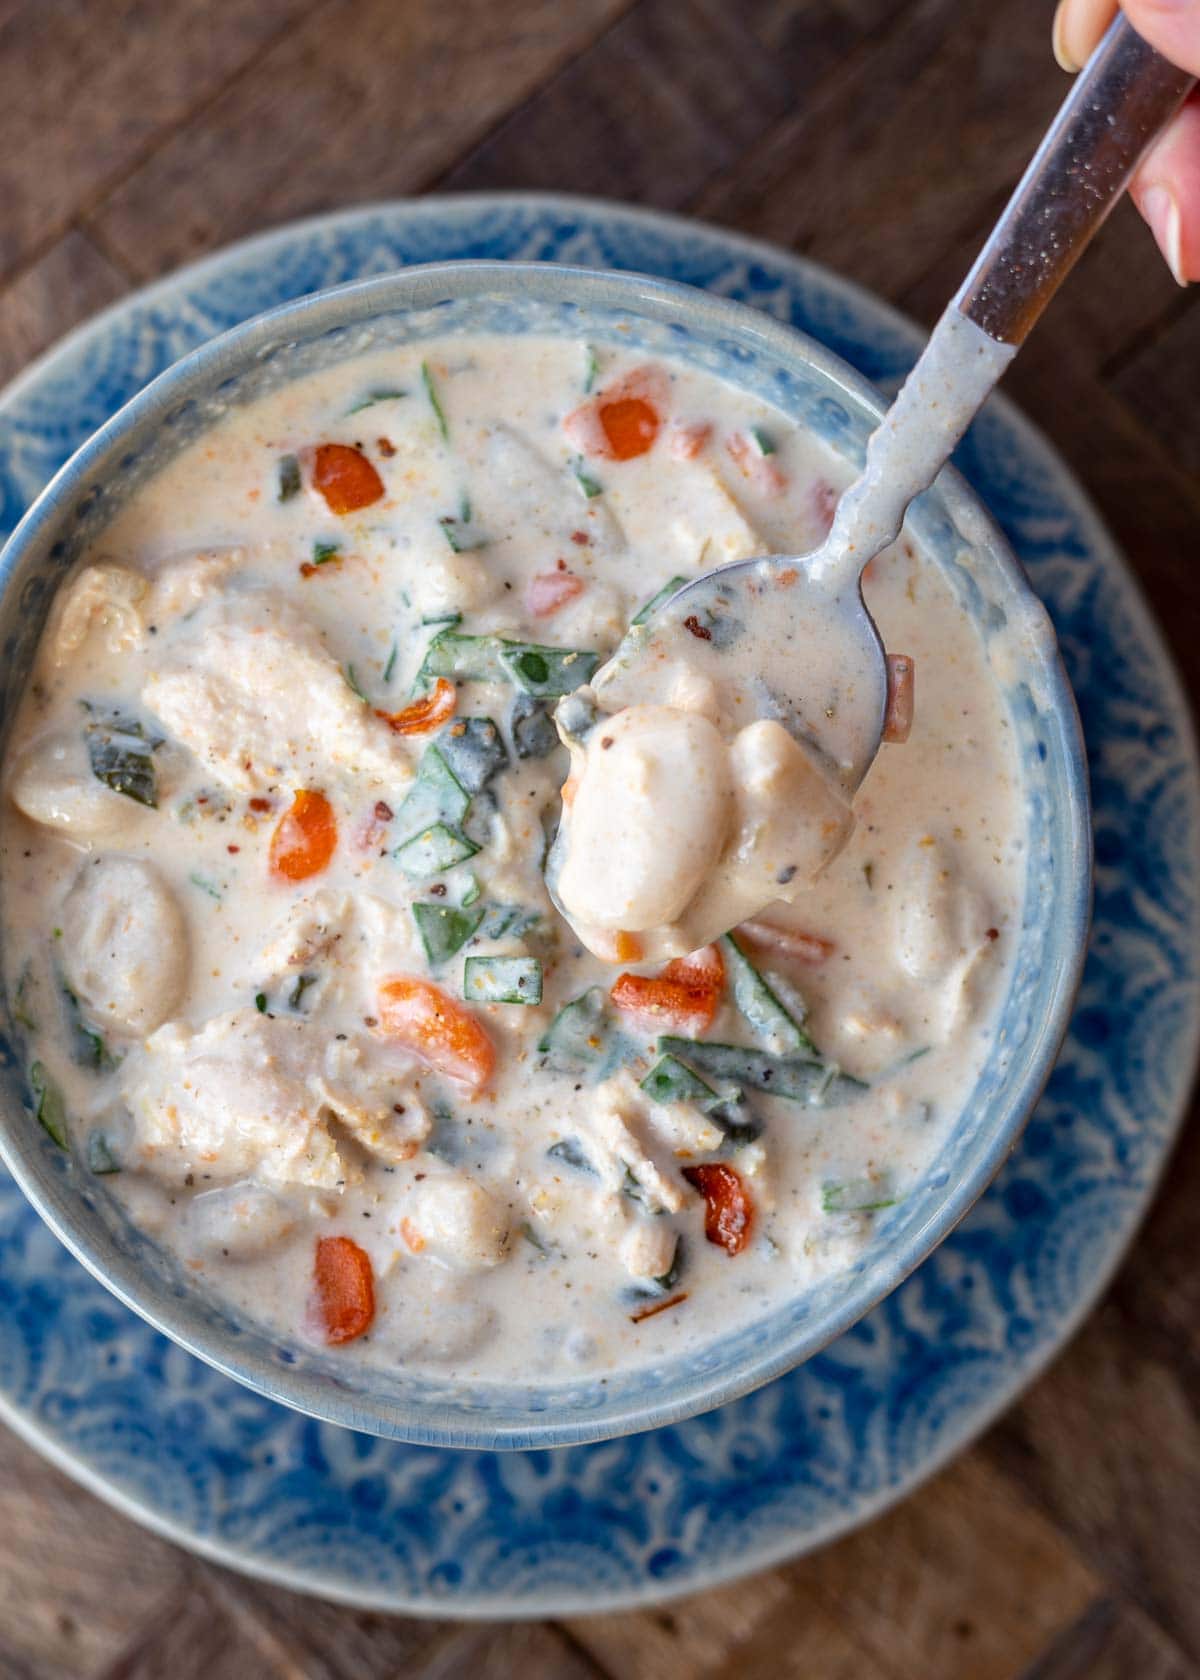 This creamy Chicken Gnocchi Soup recipe is the perfect comfort food! Tender chicken is paired with vegetables and gnocchi for a hearty, healthy meal!